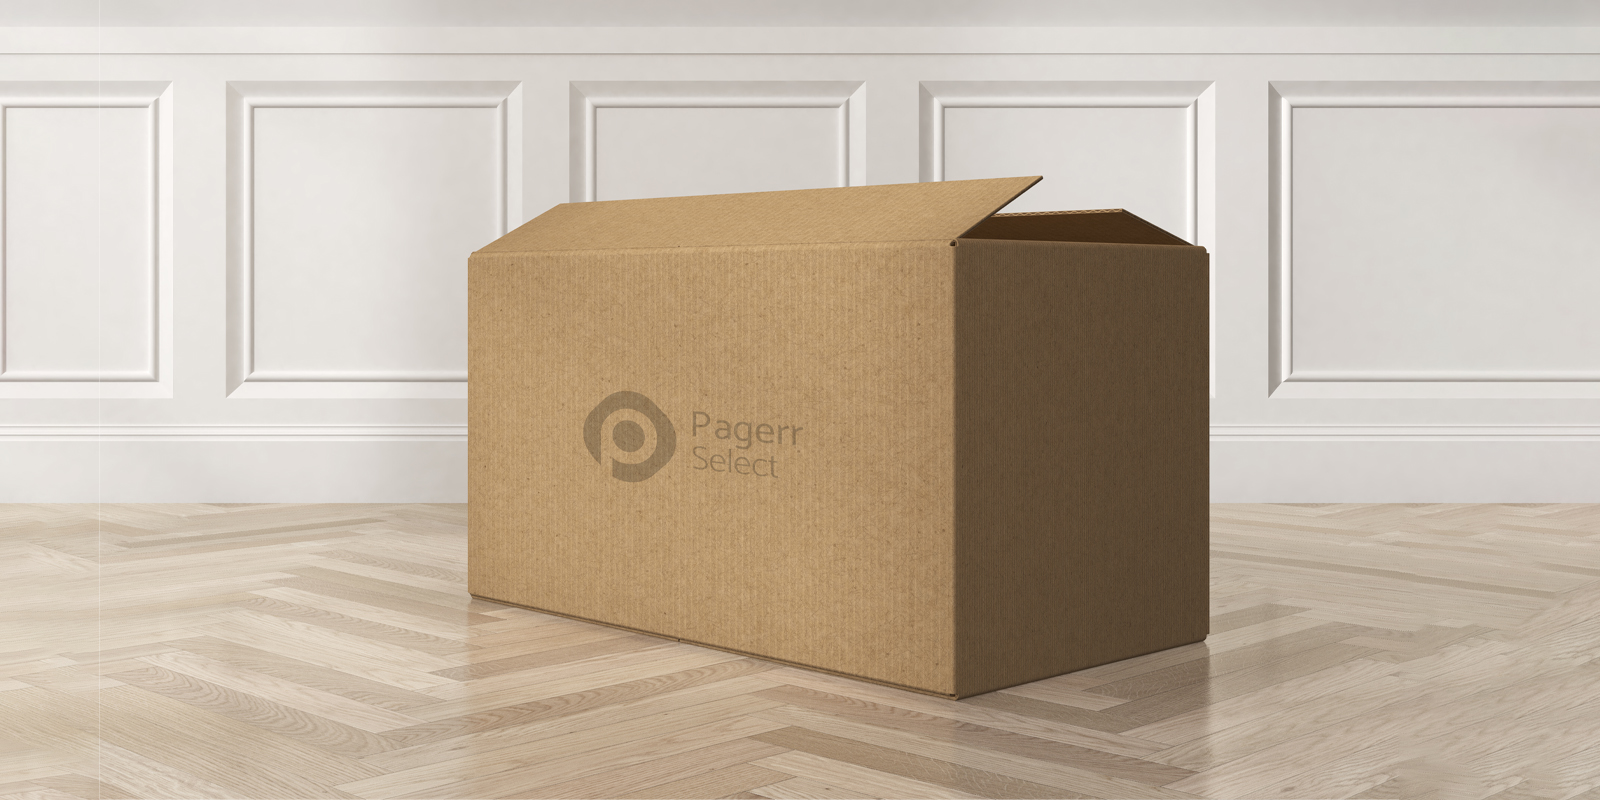 Moving boxes in Wollongong - Print with Pagerr